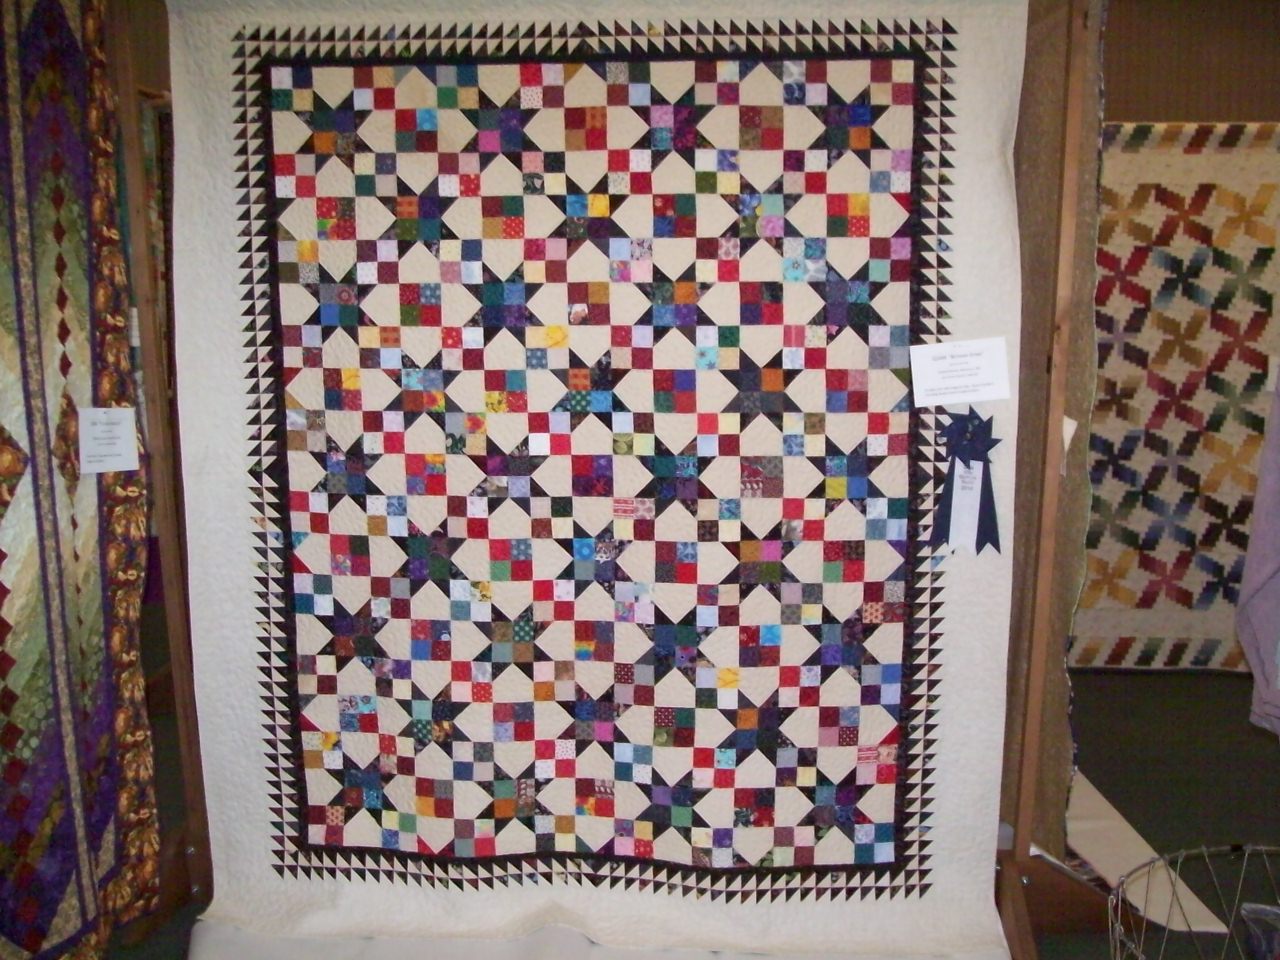 Episode 130: Can This Quilt Be Saved?